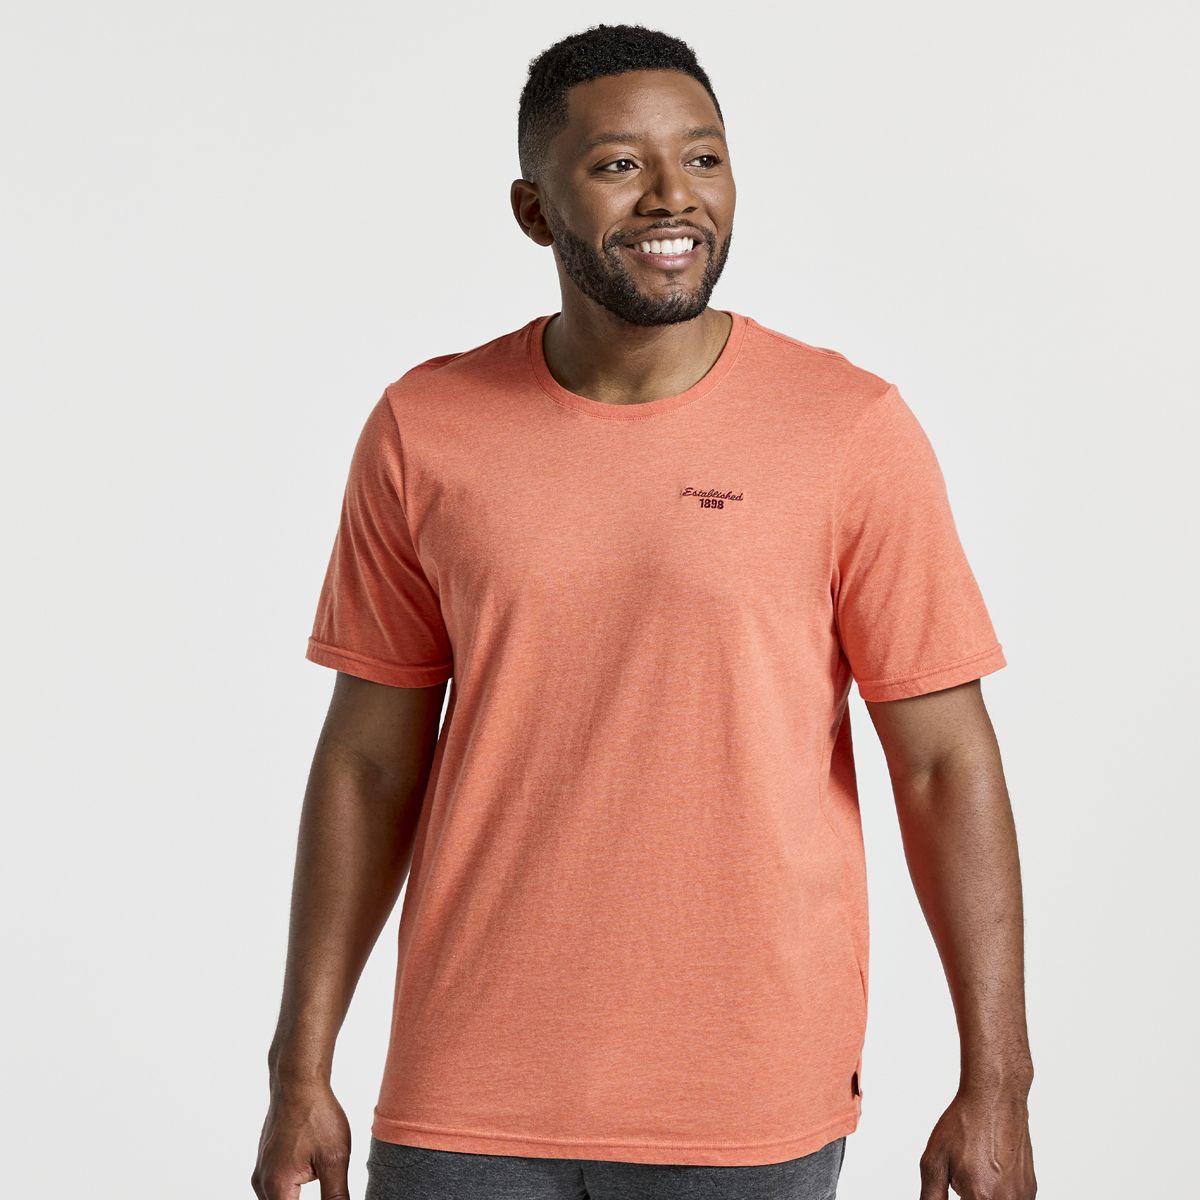 Furnace grundigt Nominering Rested T-Shirt - Shirts & Tees - Reviews | Saucony